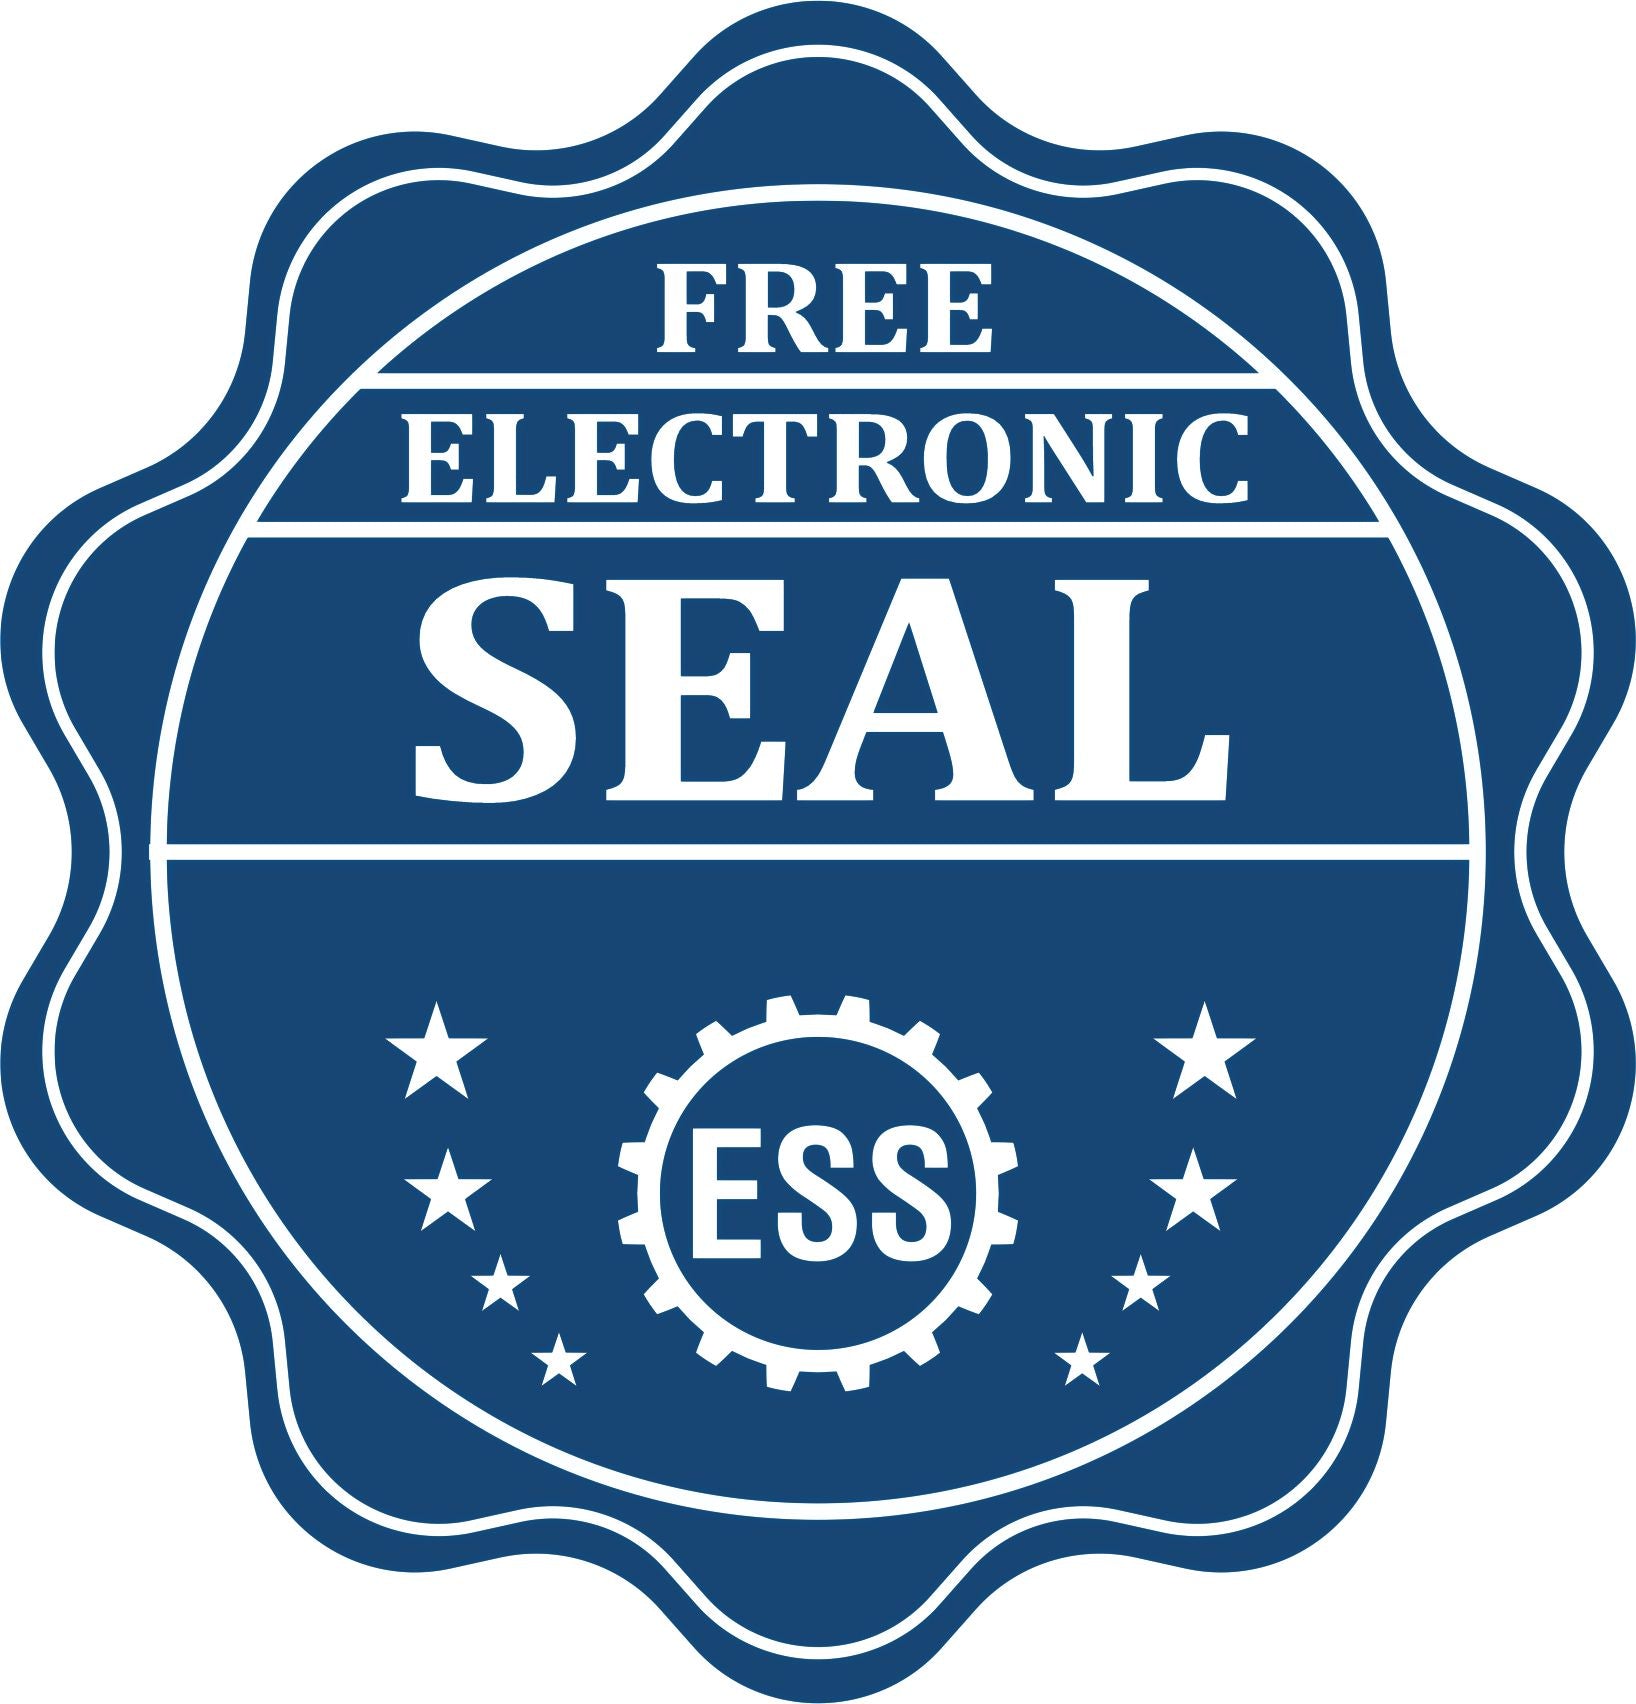 A badge showing a free electronic seal for the Alabama Long Reach Landscape Architect Embossing Stamp with stars and the ESS gear on the emblem.